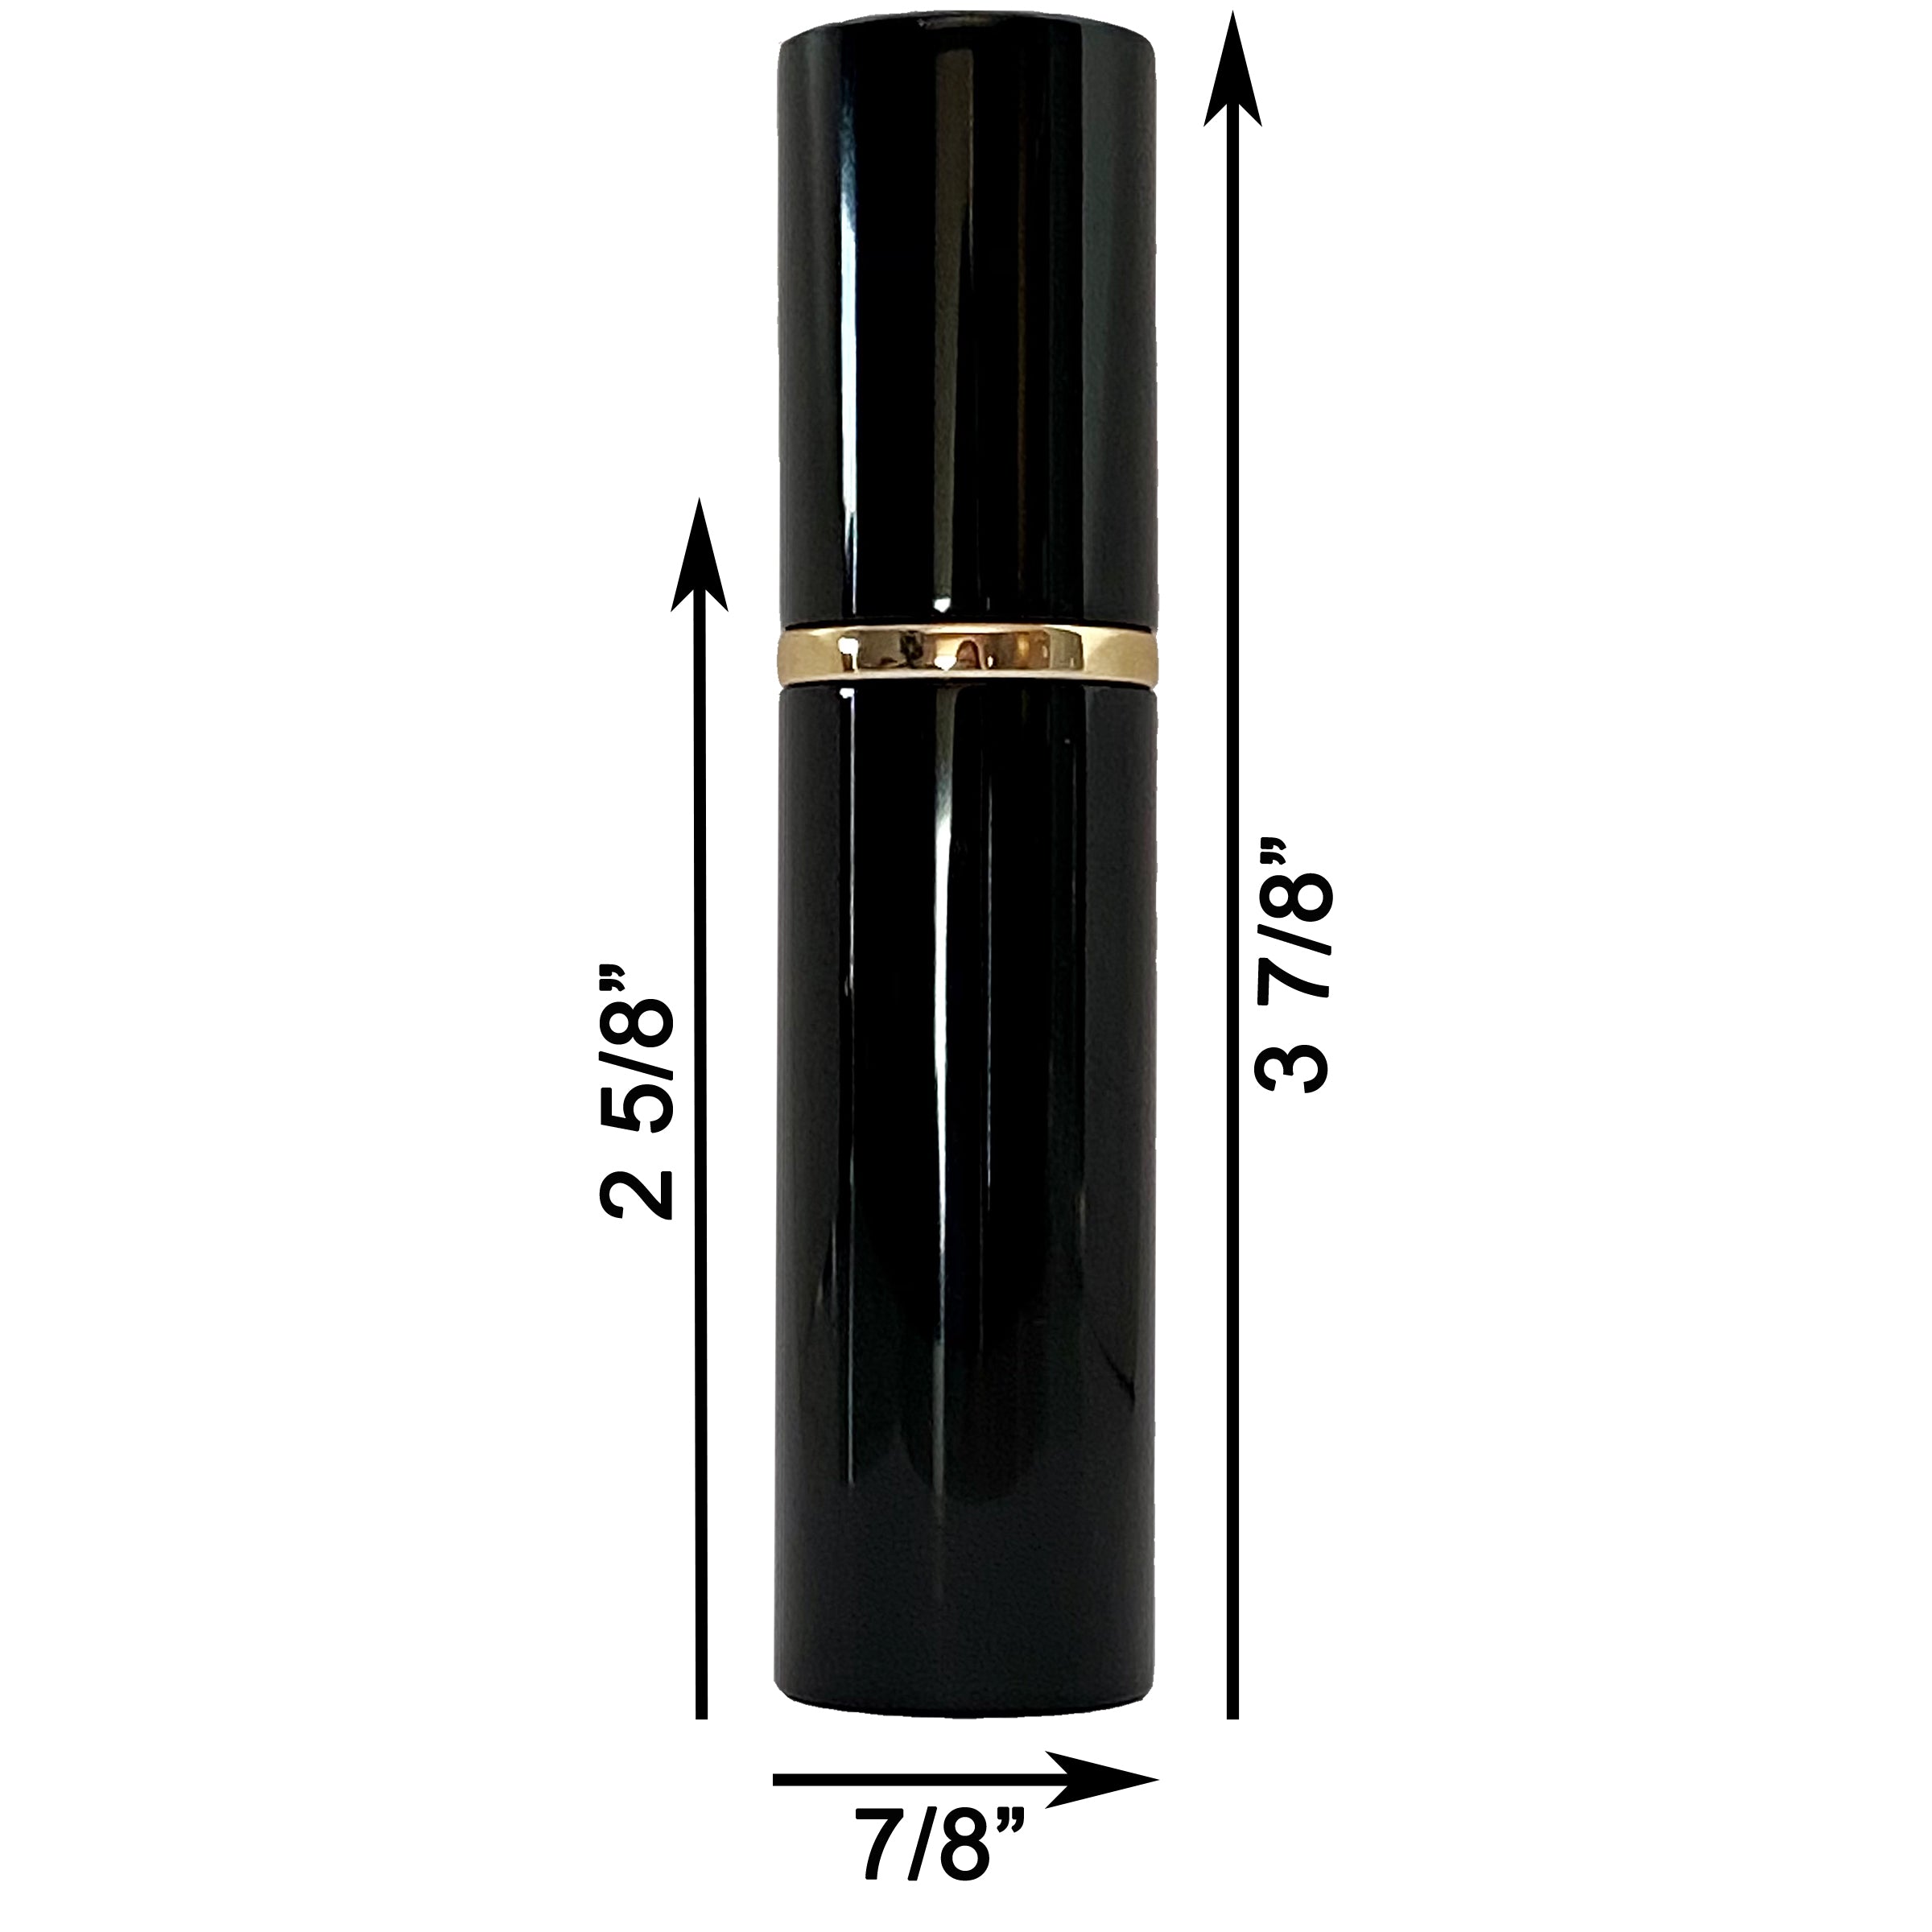 Attrape-rÊves Large Gold Luxe Travel Atomizer Half Ounce 15ml